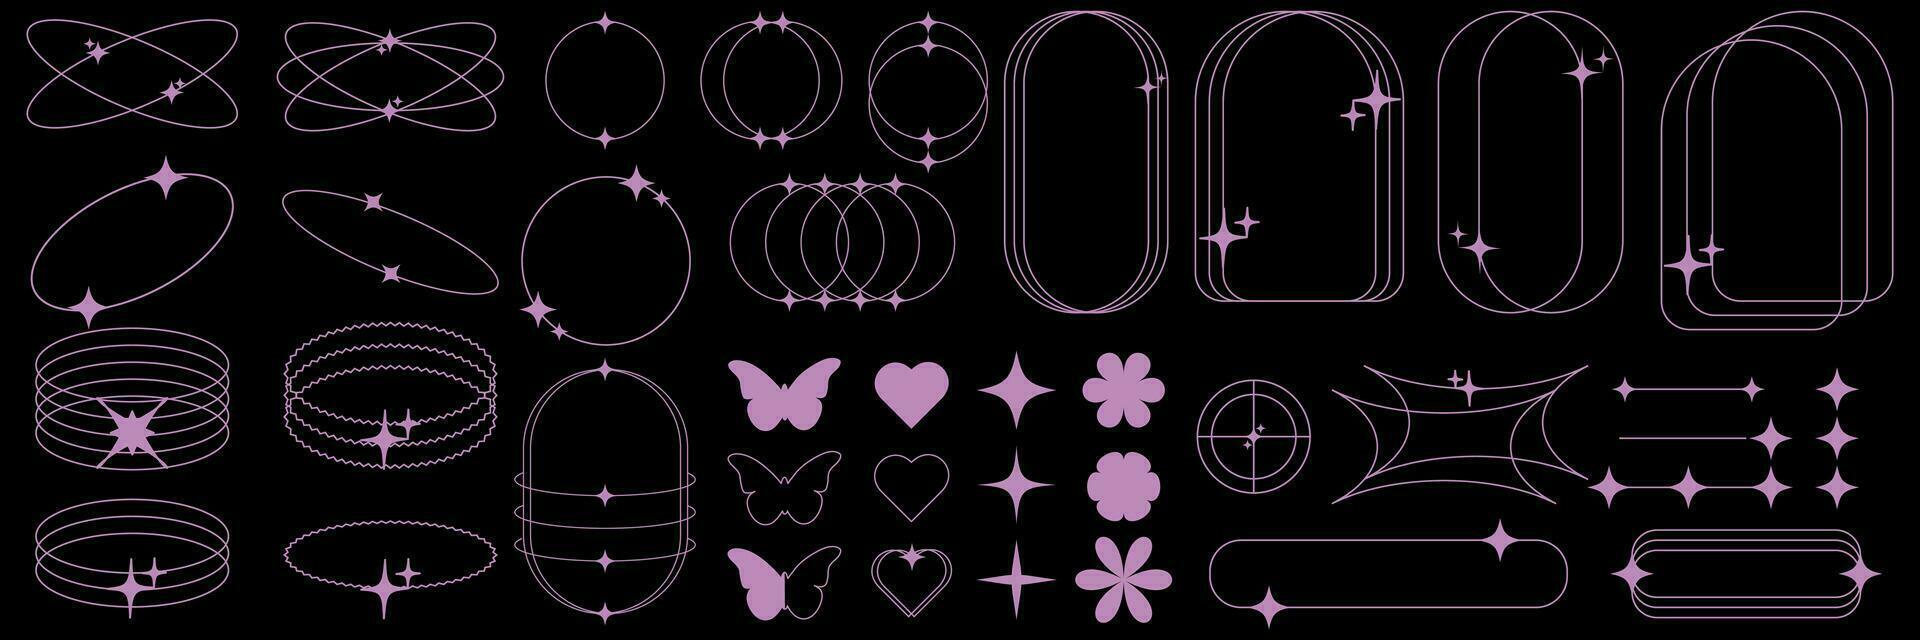 Modern minimalistic linear shapes. Arched frames with stars, heart, butterfly, geometric shapes., trendy linear frames with stars, geometric shapes. Vector illustration.